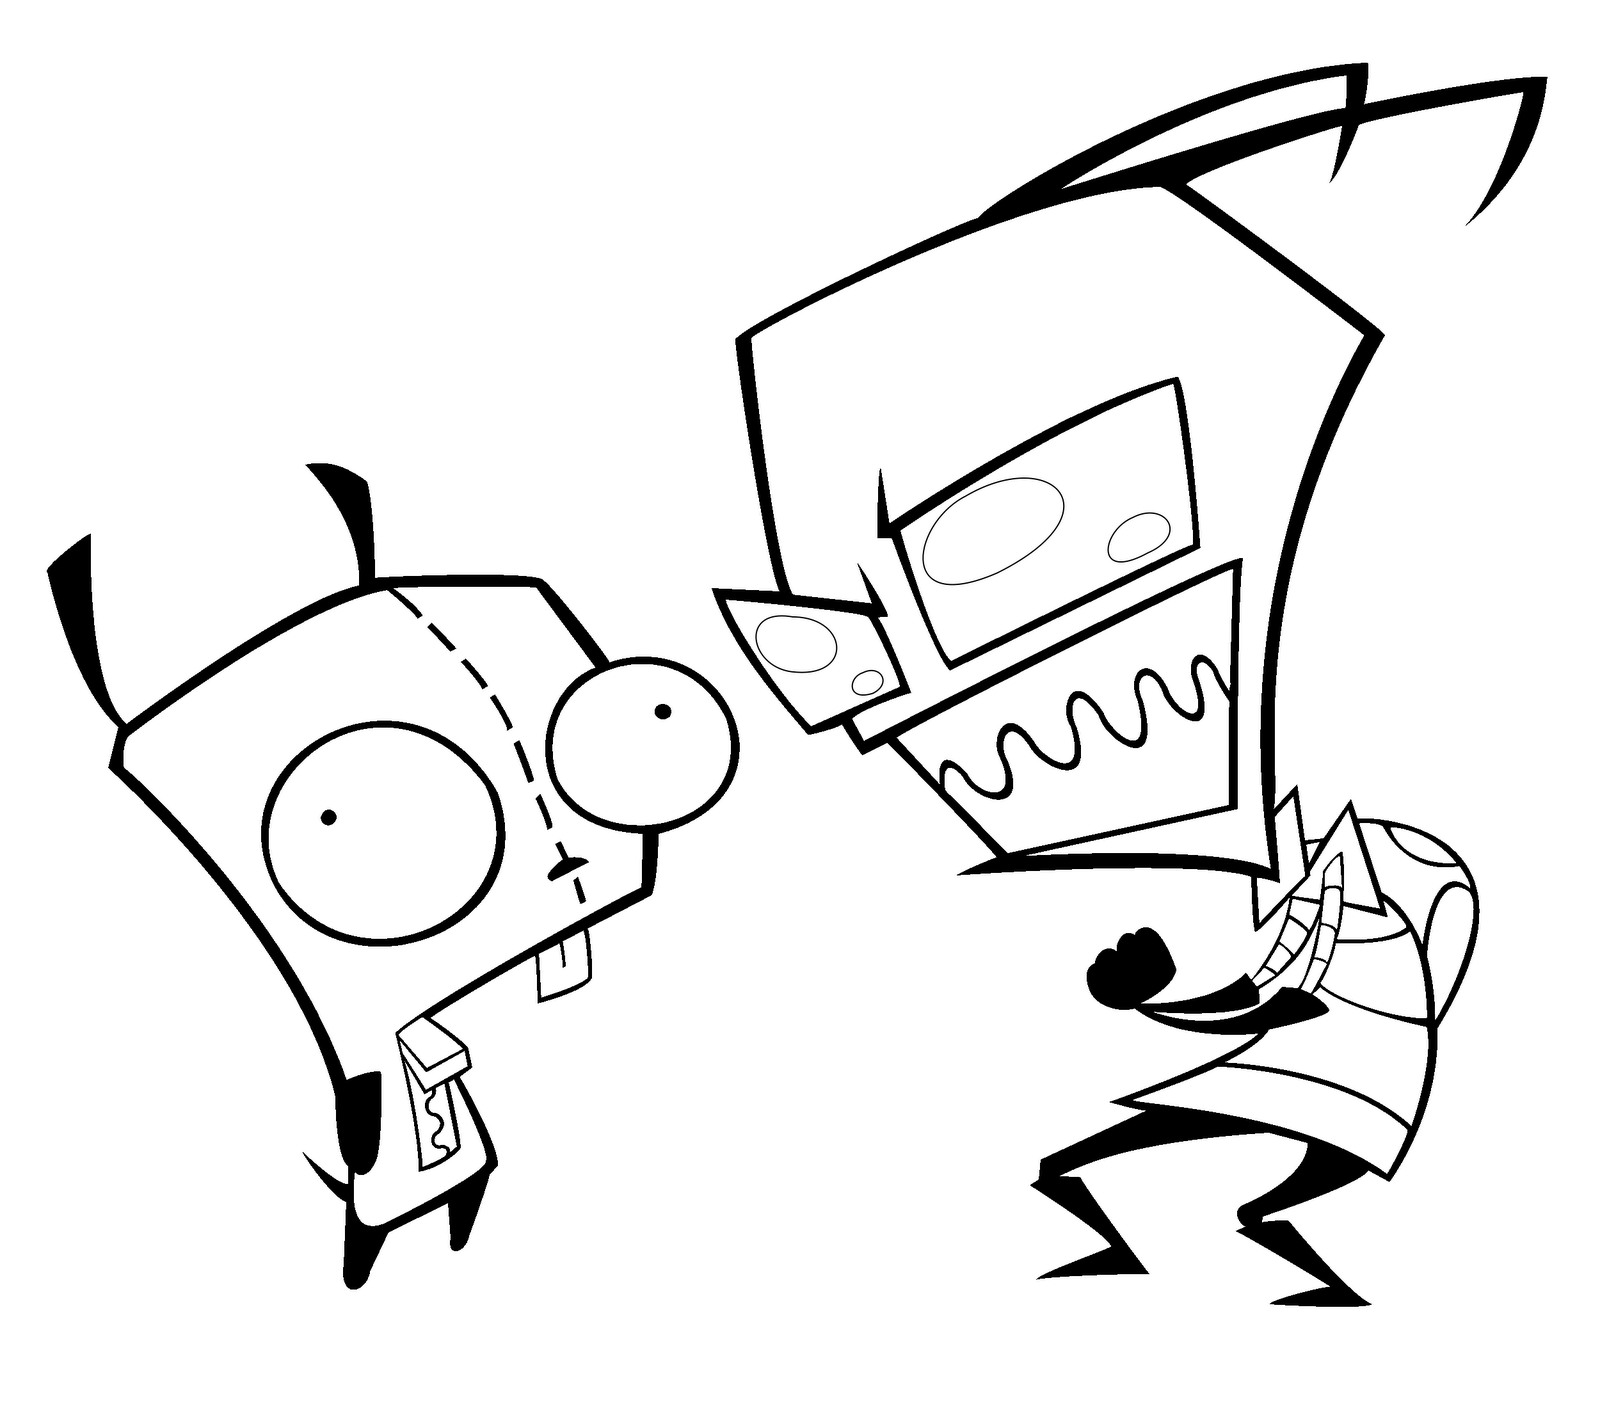 Printable GIR Coloring Pages Pdf - Gir Coloring Pages To Print